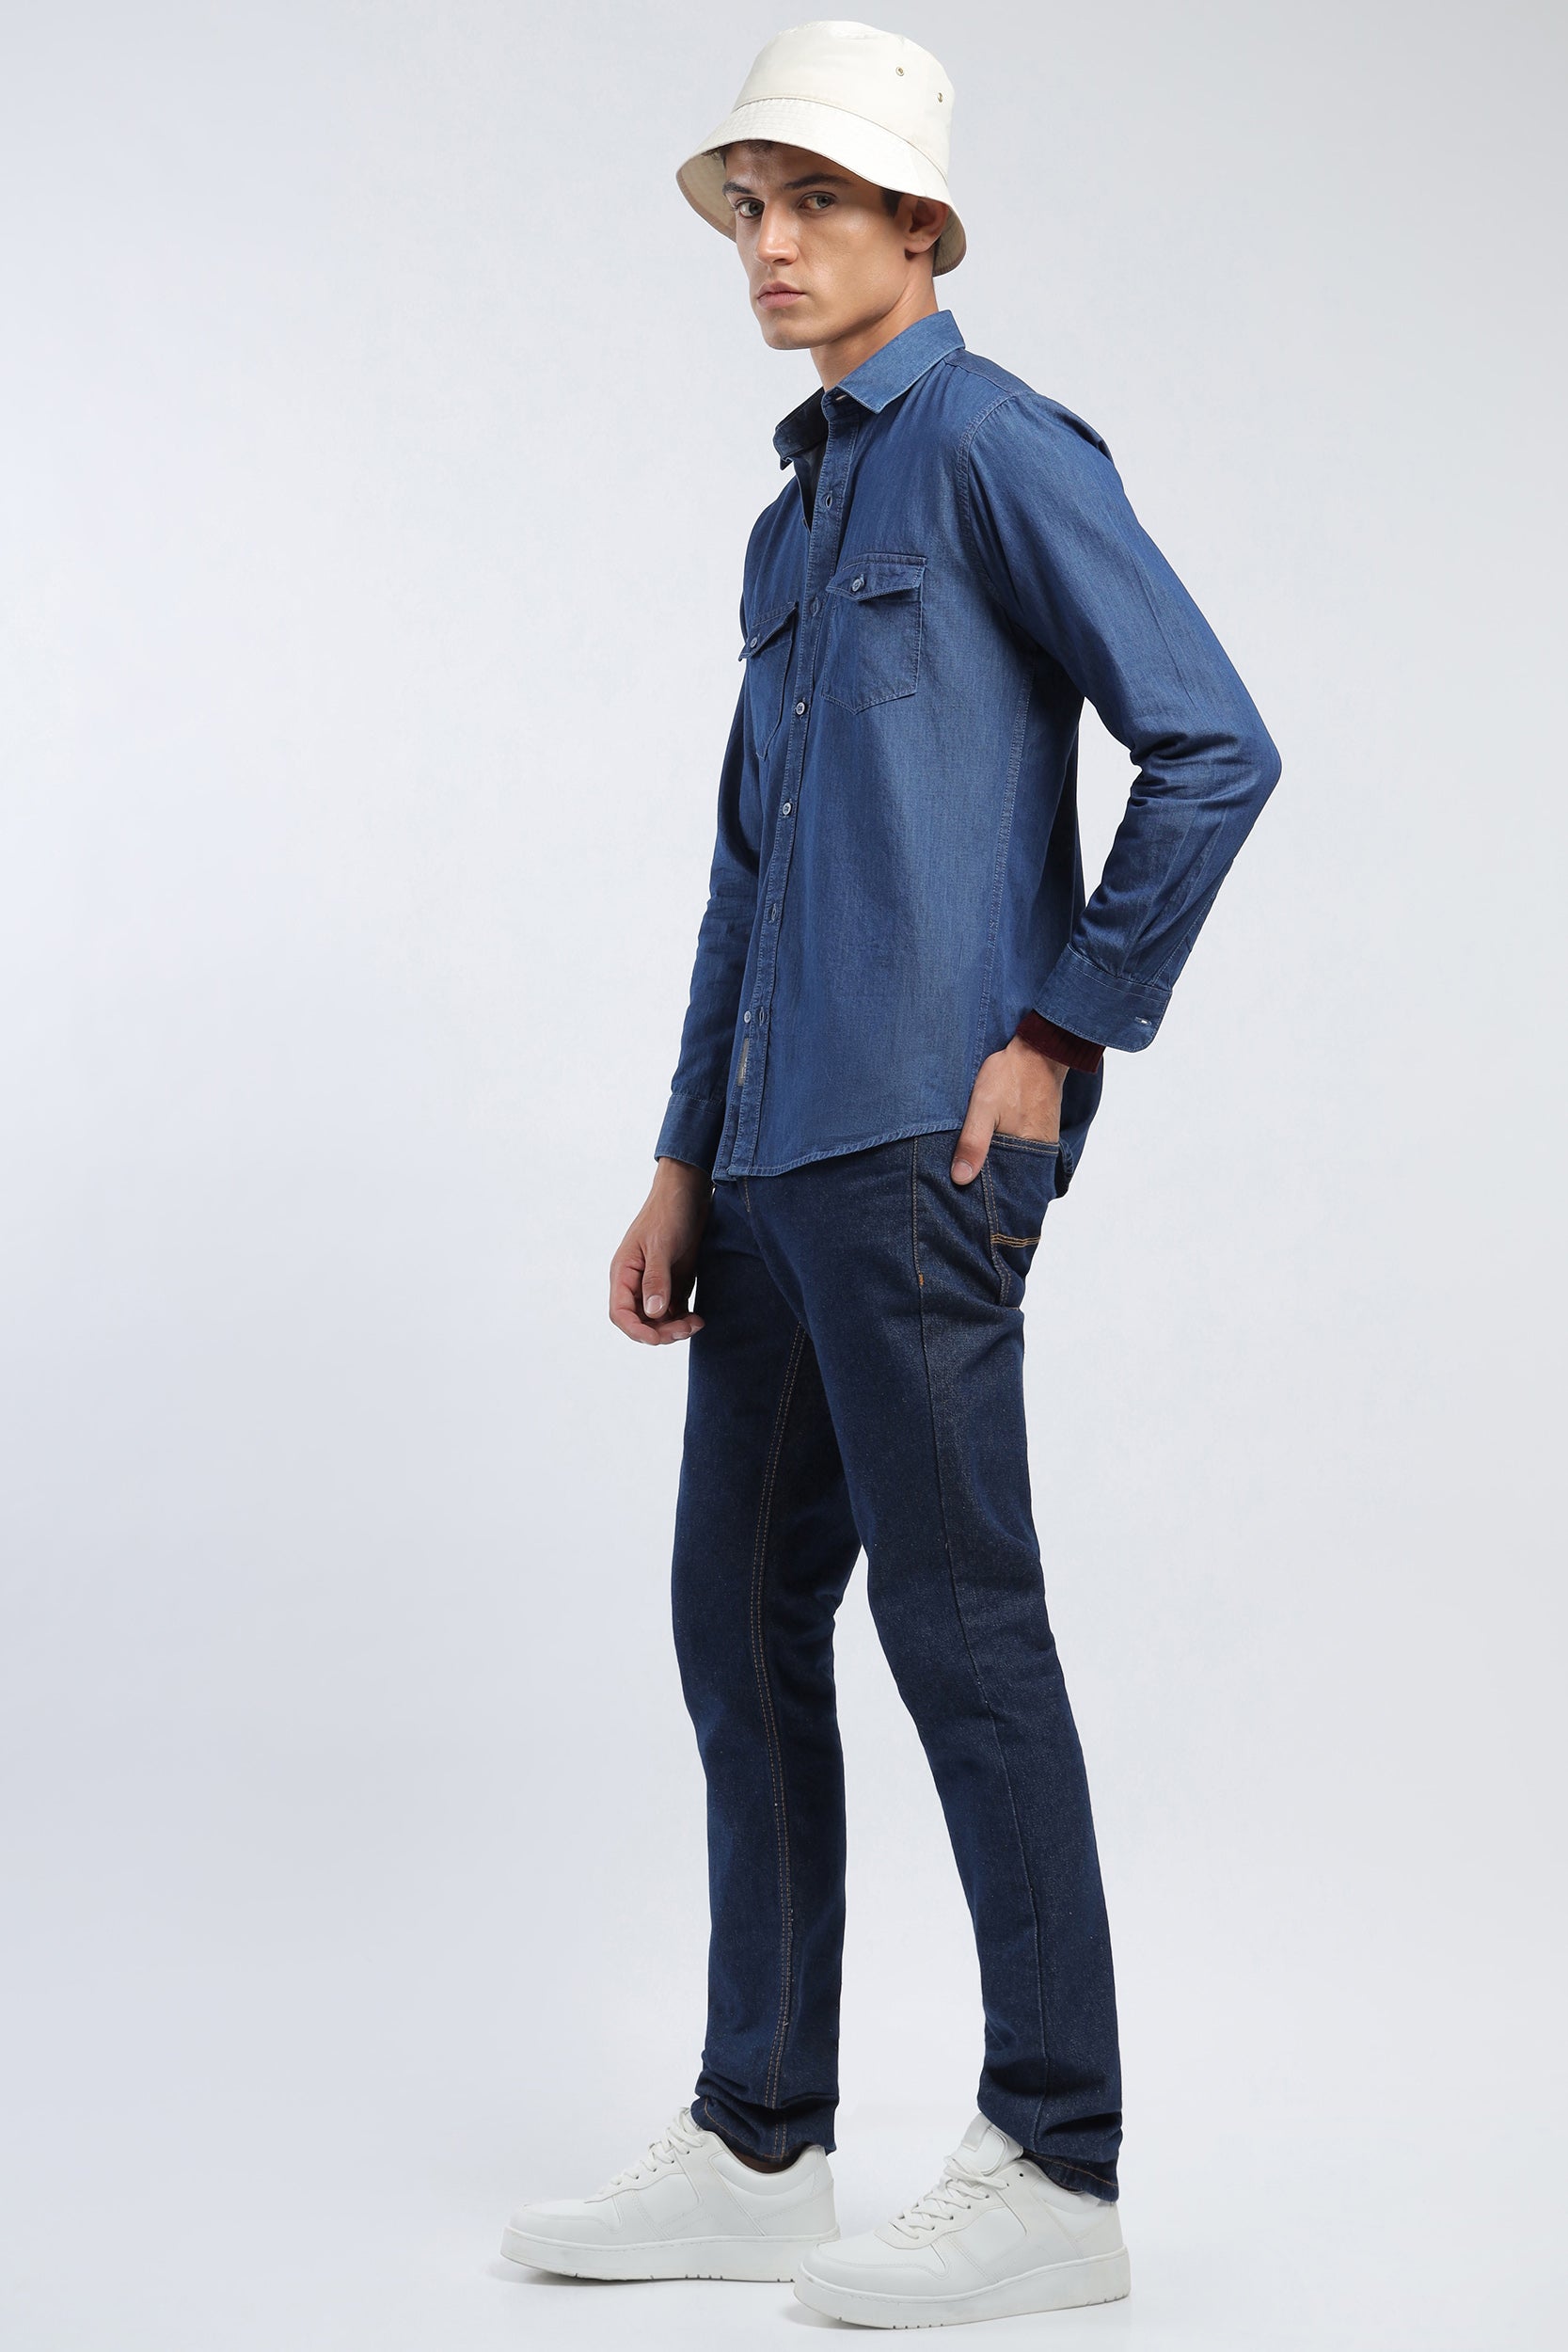 Menswear Marvels: A Closer Look at the Latest Trends in Denim Shirts -  Tistabene